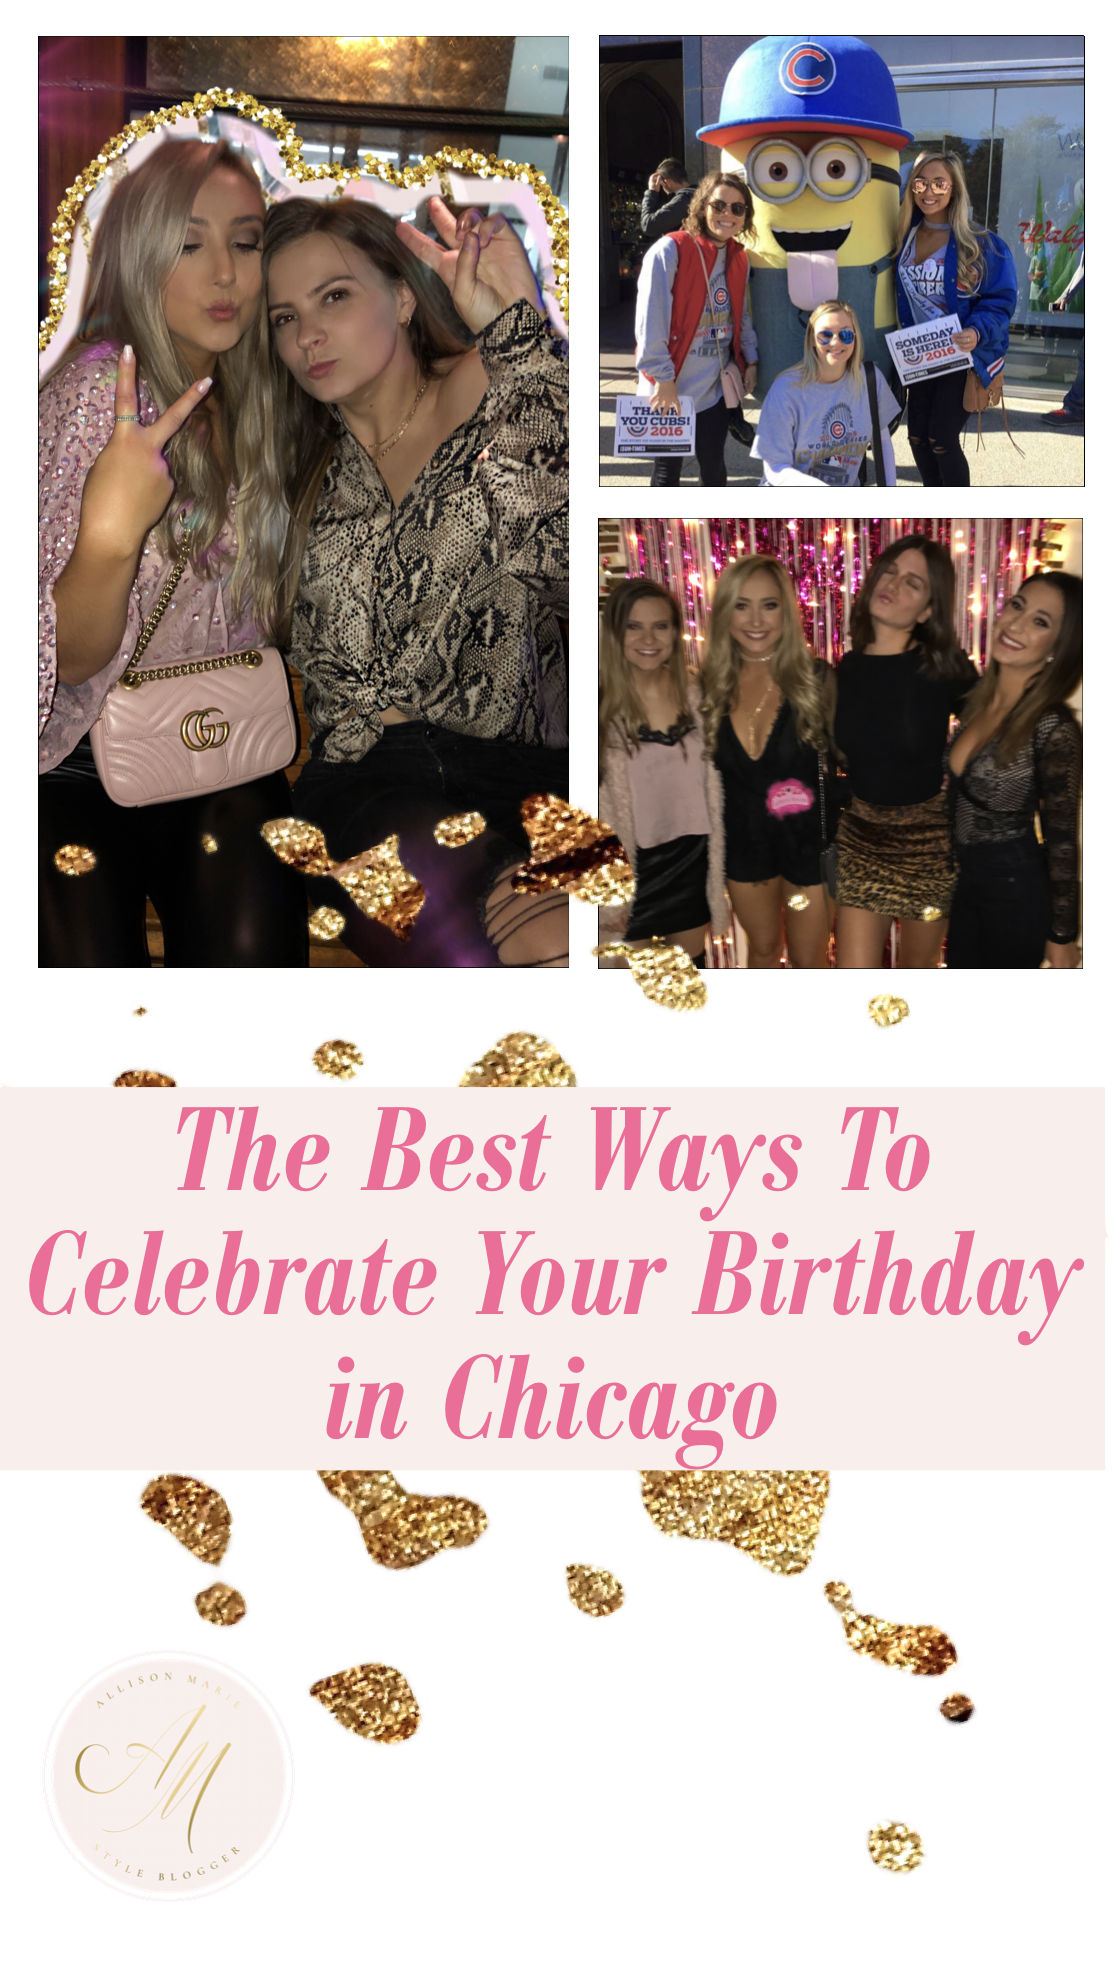 How to Celebrate Your Birthday in Chicago